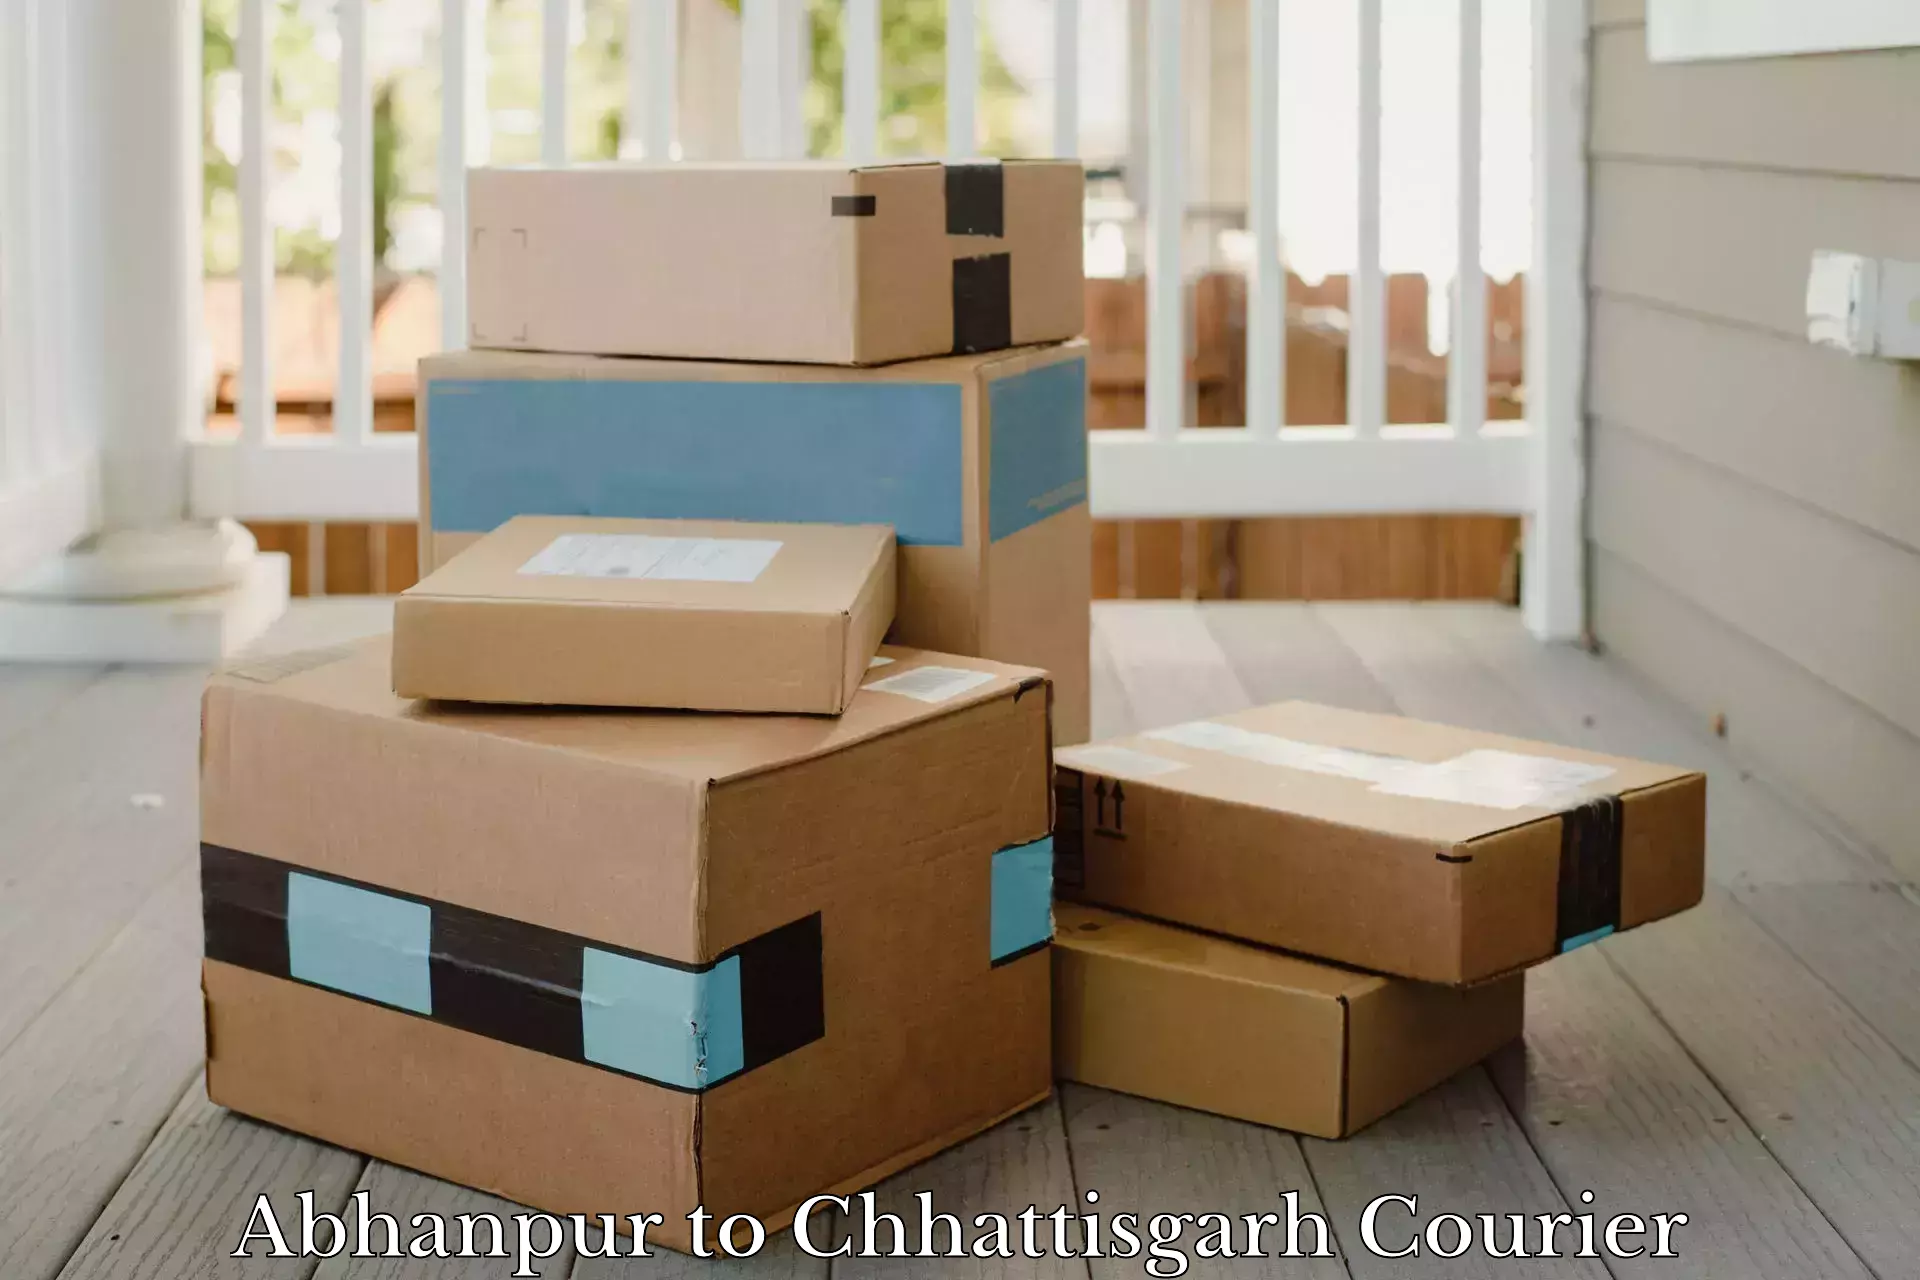 Same-day delivery solutions Abhanpur to Patna Chhattisgarh